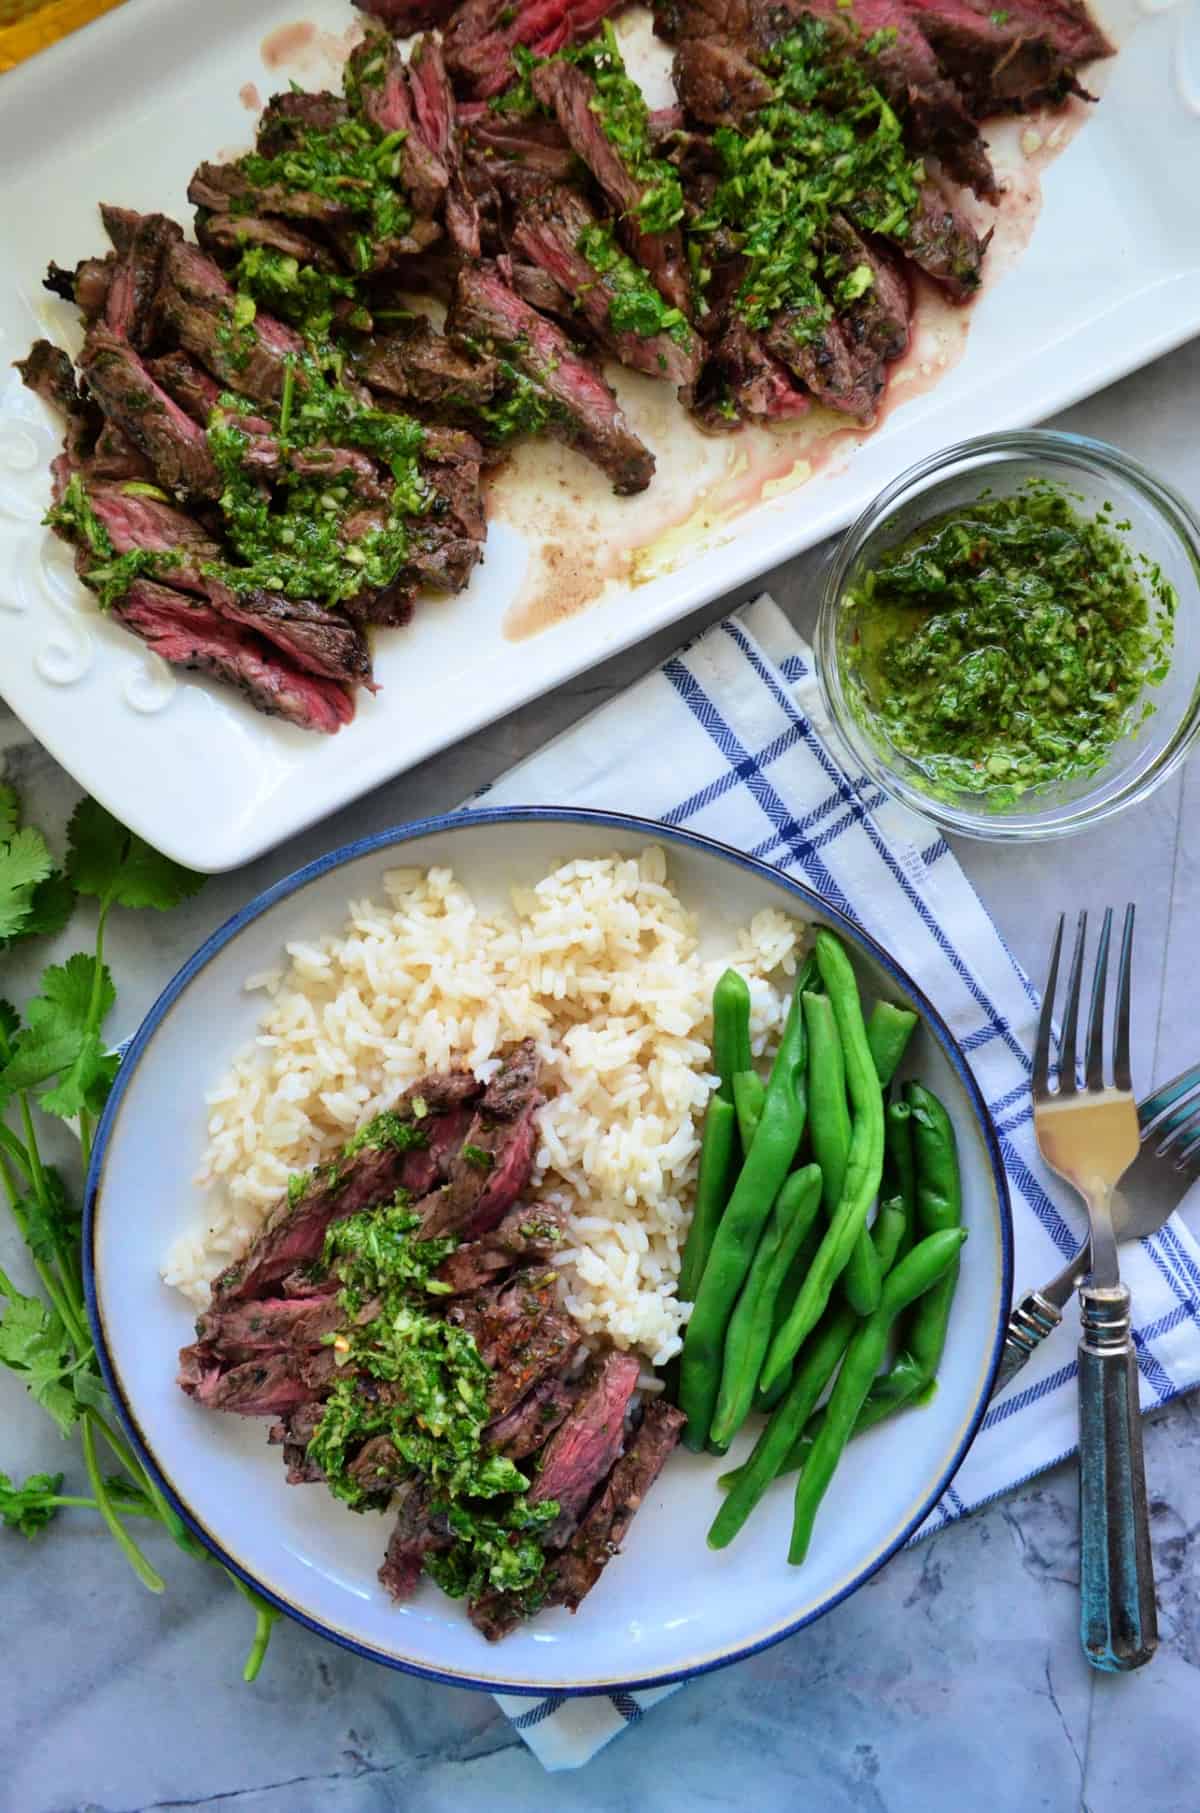 plated chimichurri sauce on grilled skirt steak with green beans over rice bed next to steak platter.